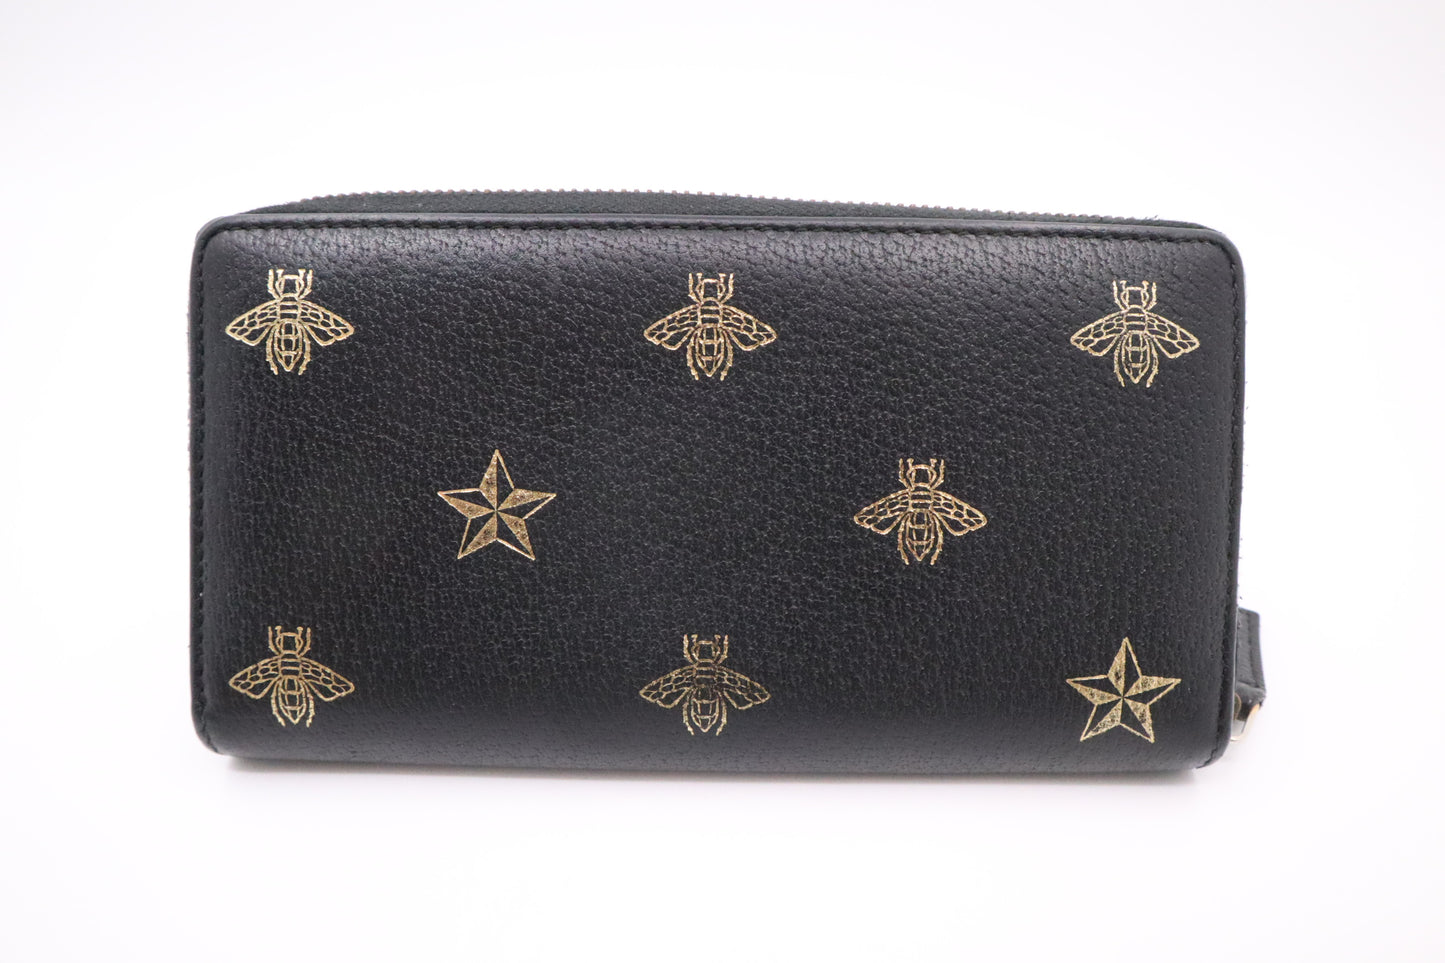 Gucci Zippy Bee Wallet in Black Leather